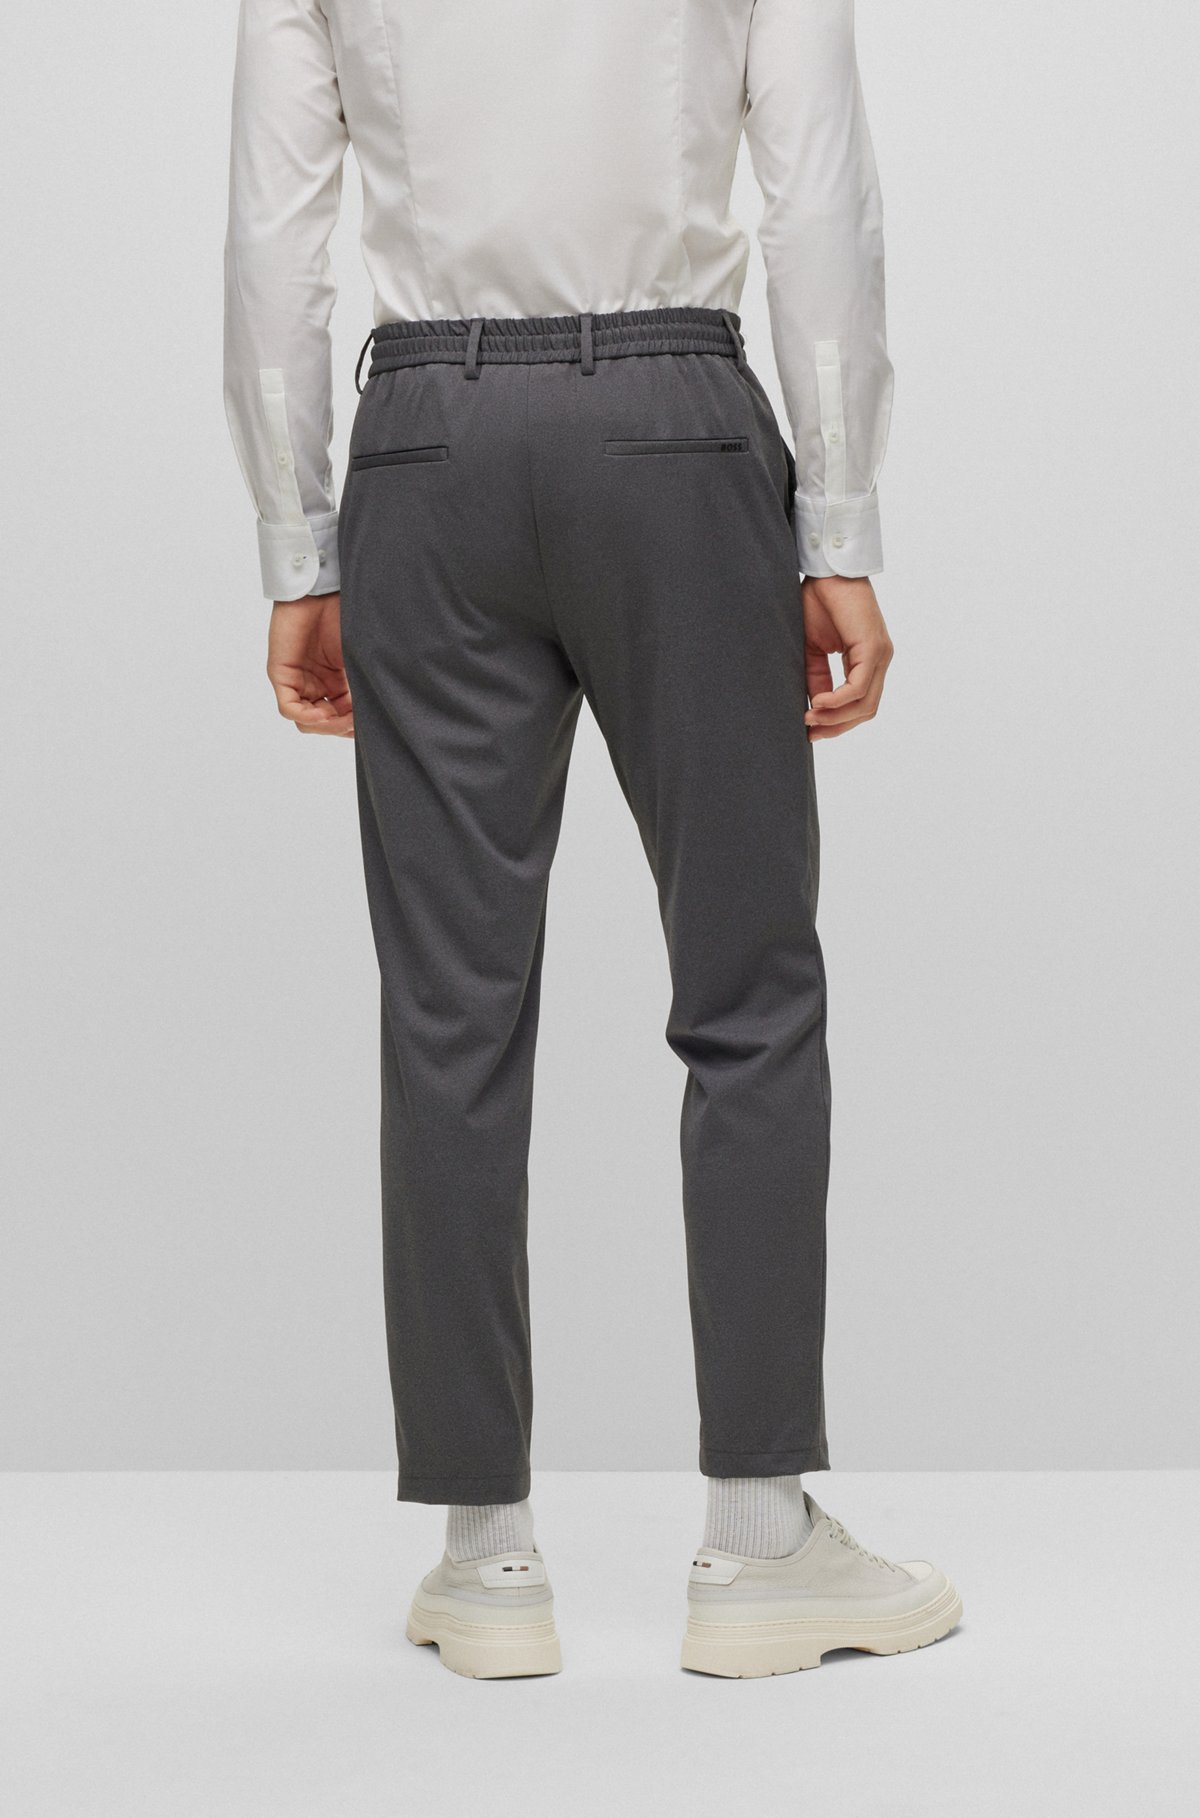 Slim-fit trousers in micro-patterned jersey , Silver